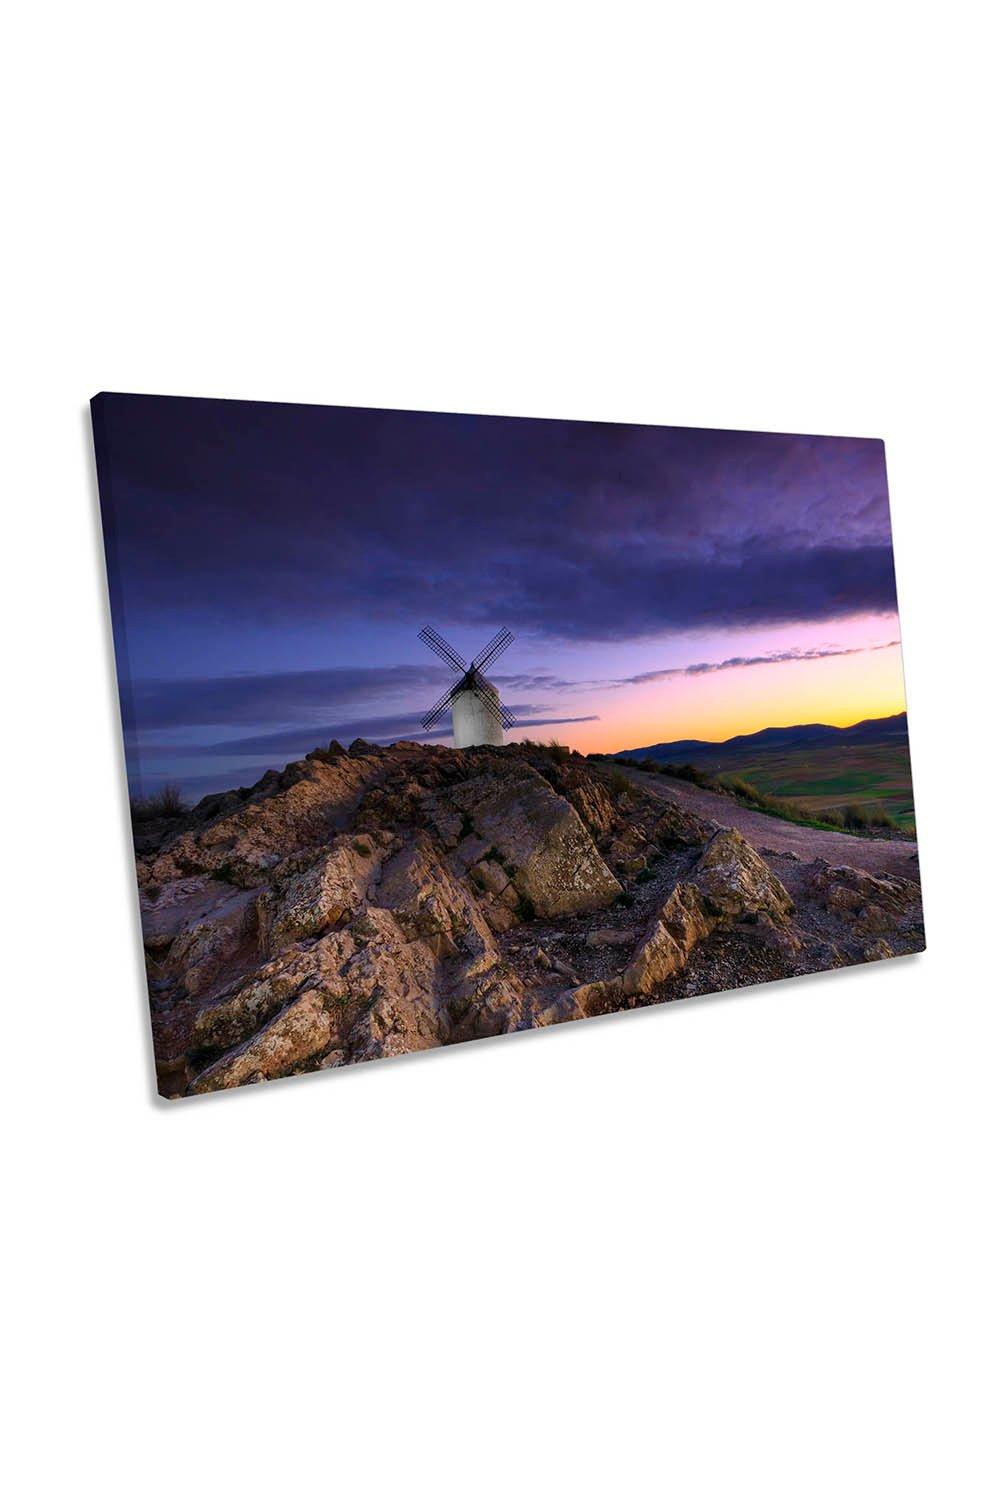 Windmill Sunset Spain Landscape Canvas Wall Art Picture Print